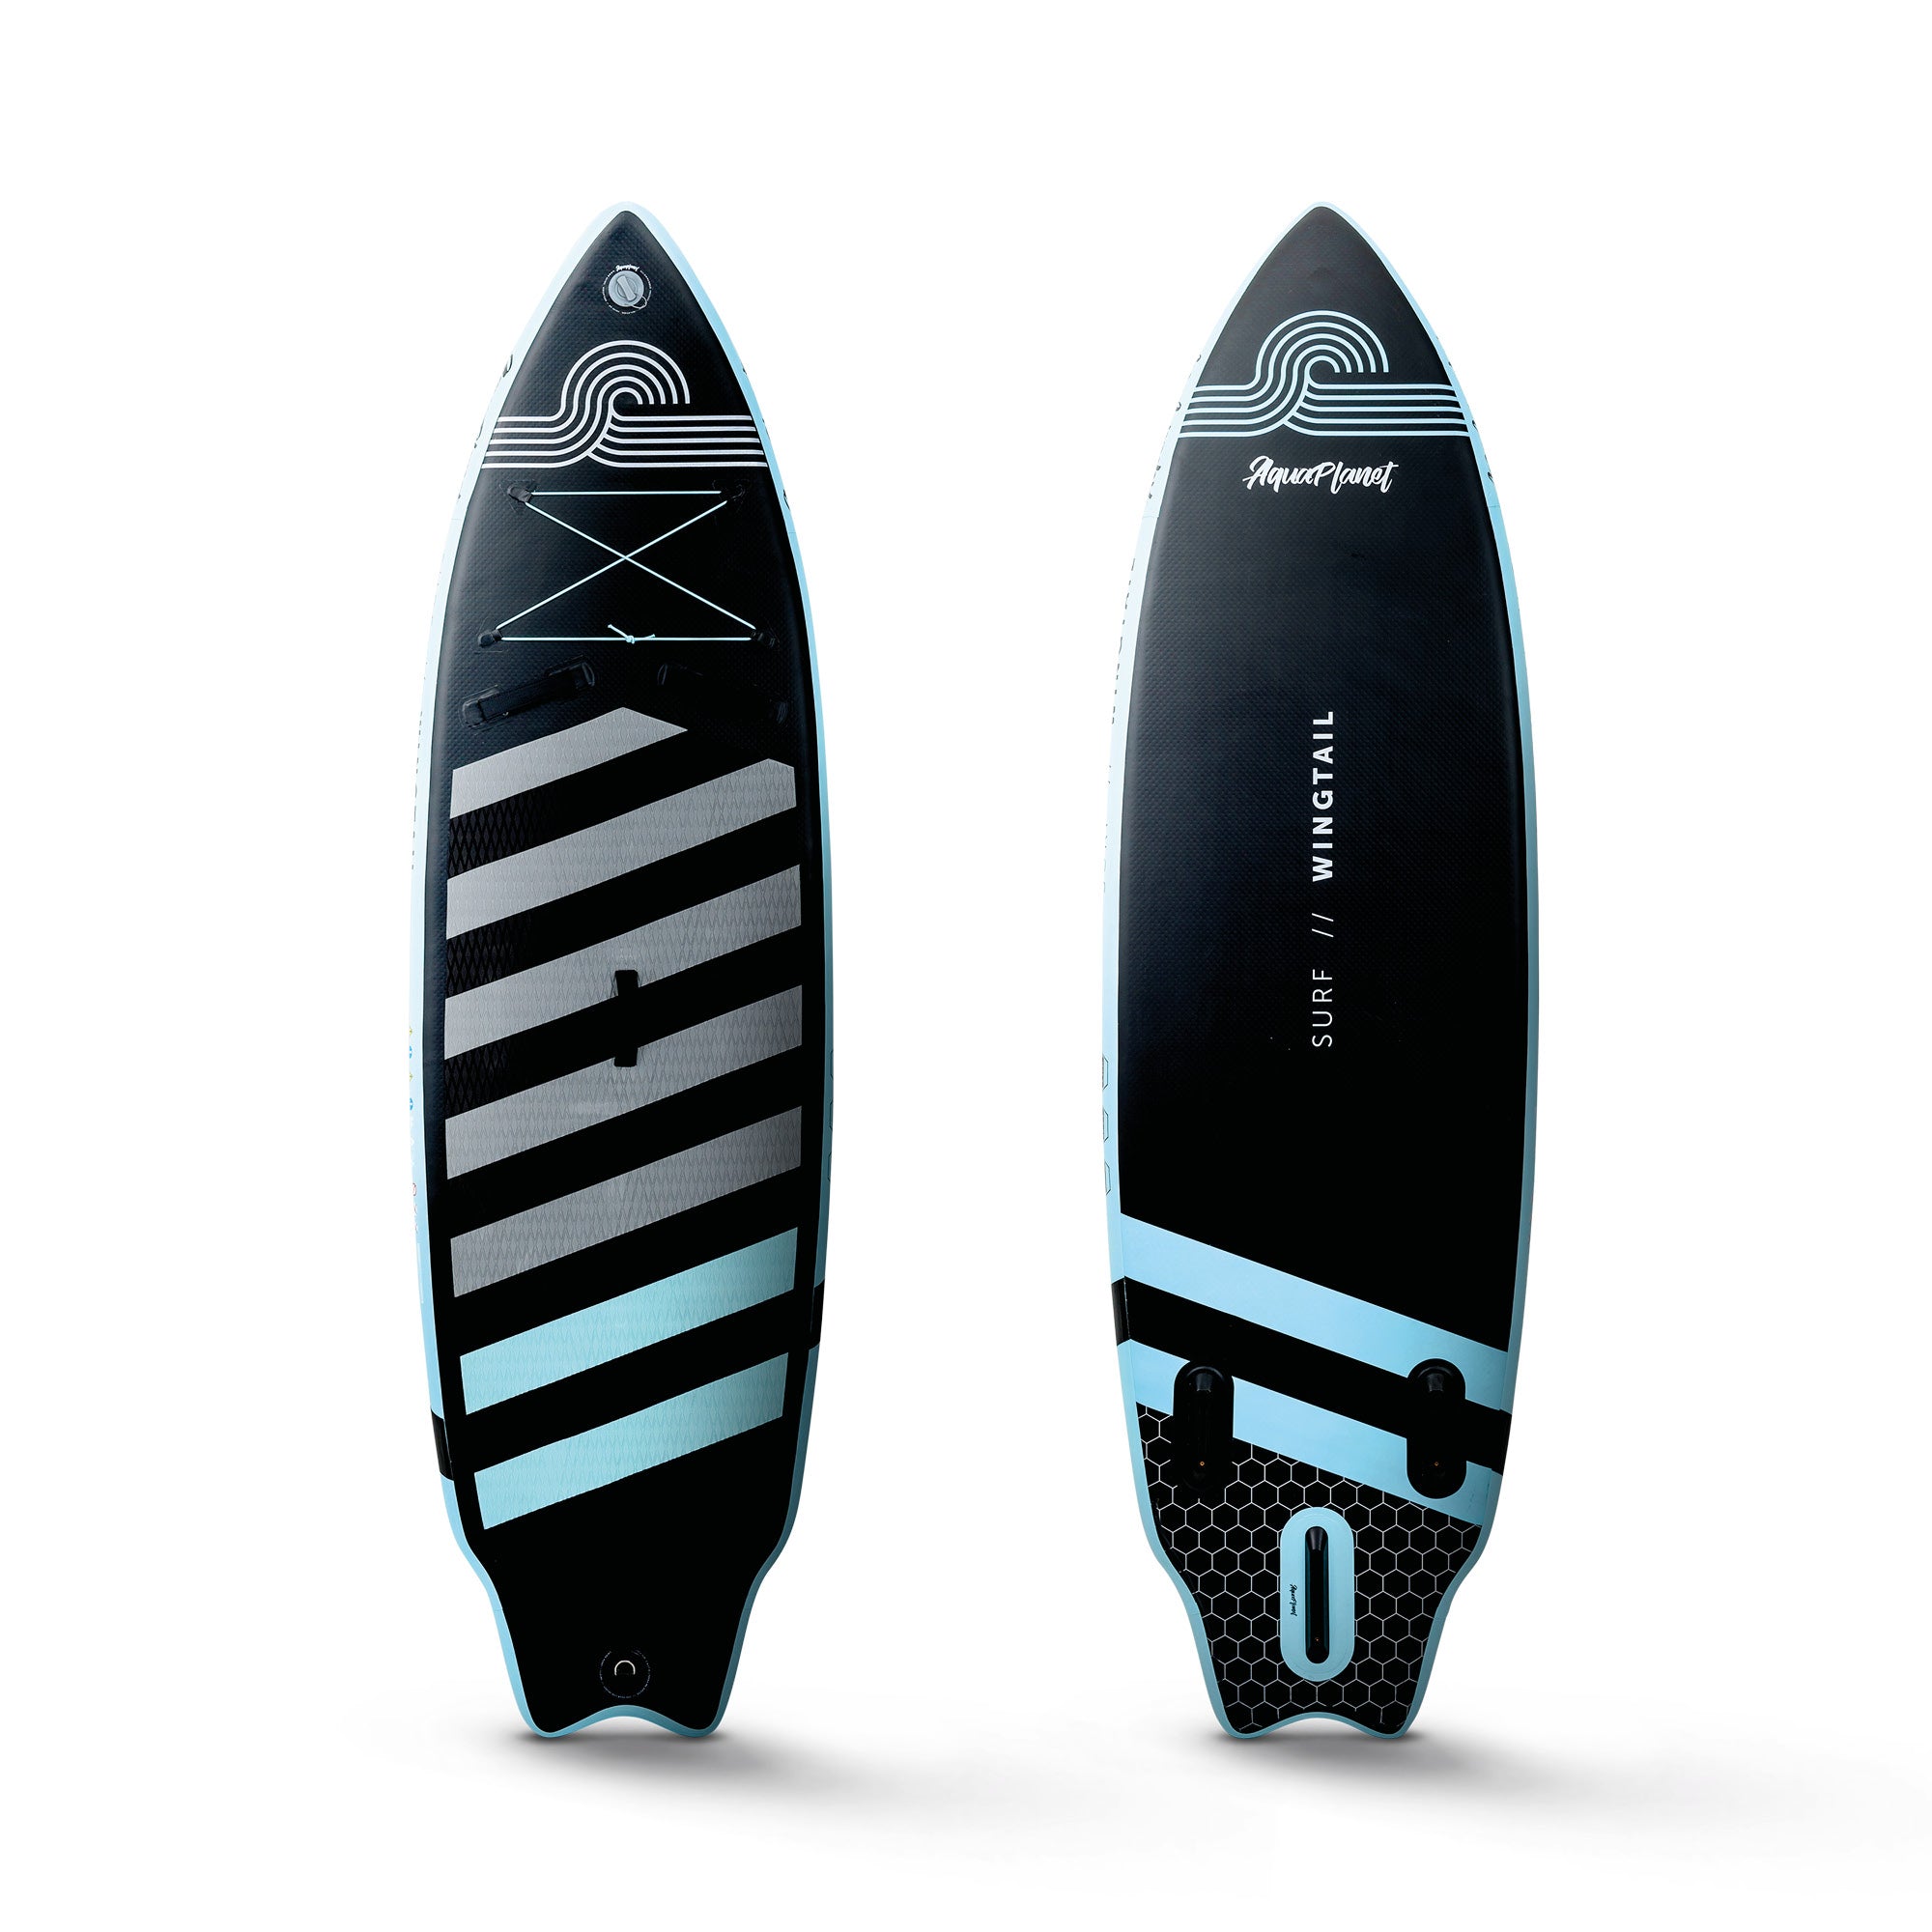 Aquaplanet Wingtail 9' iSUP Inflatable Stand Up Paddleboard Set